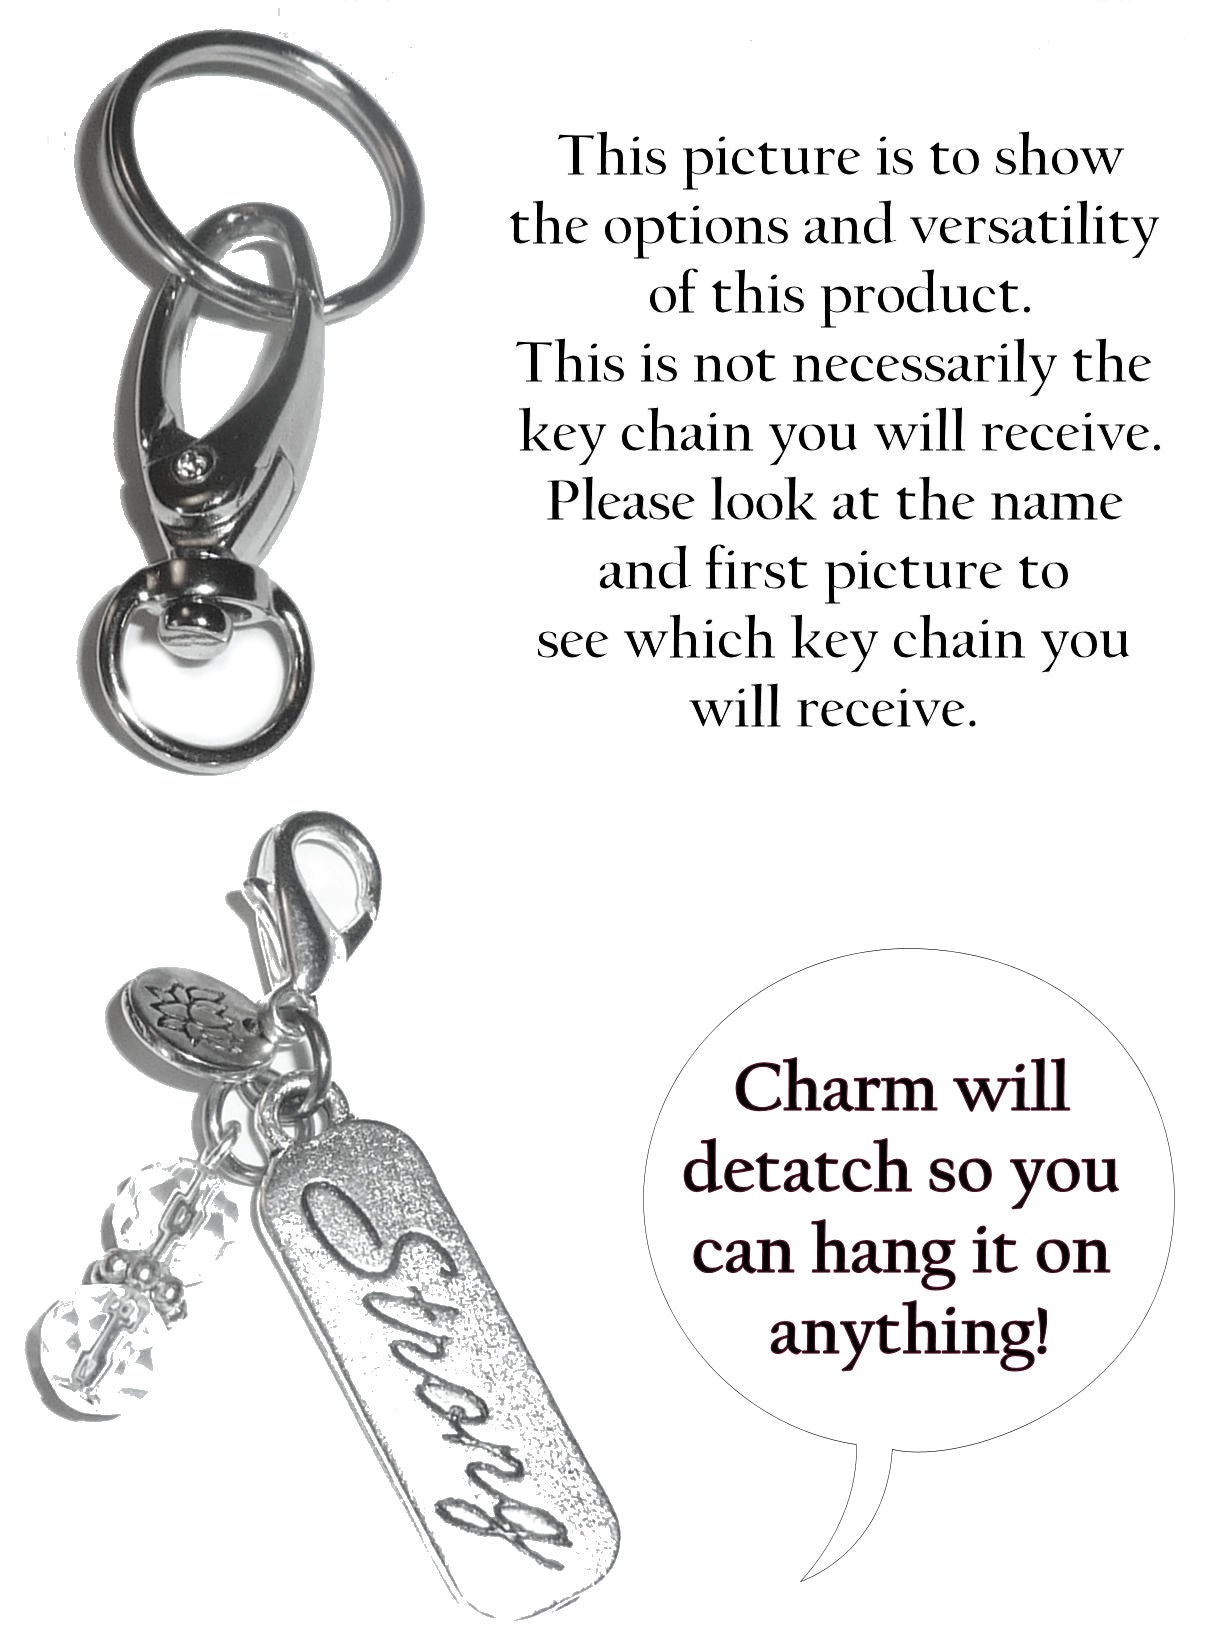 (Peach ( Uterine Cancer )) Charm Key Chain Ring, Women's Purse or Necklace Charm, Comes in a Gift Box!